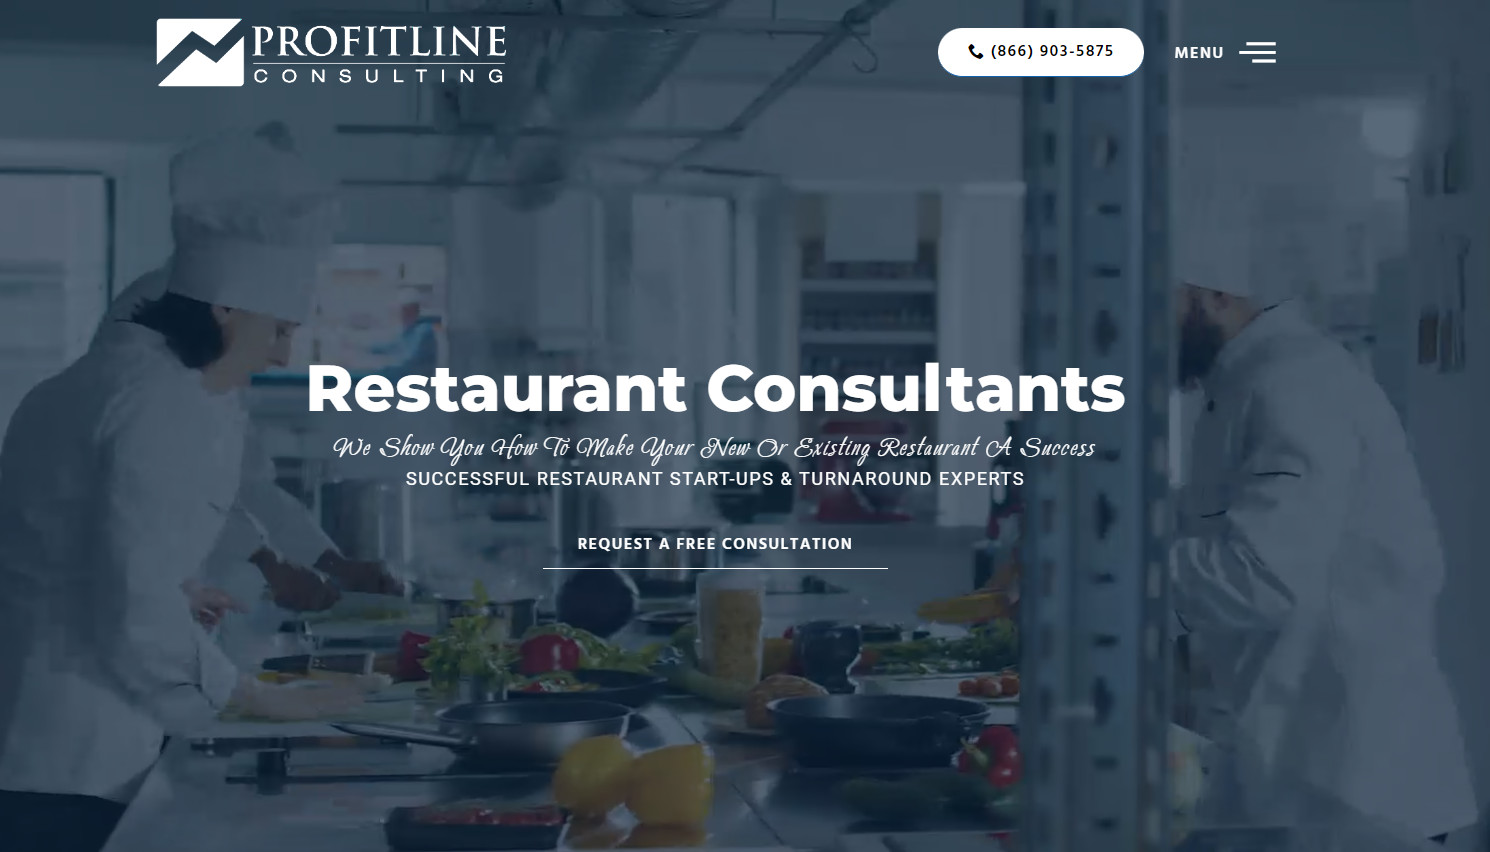 Restaurant Experts offers one of the best restaurant management blogs and consultation services for all food service business types